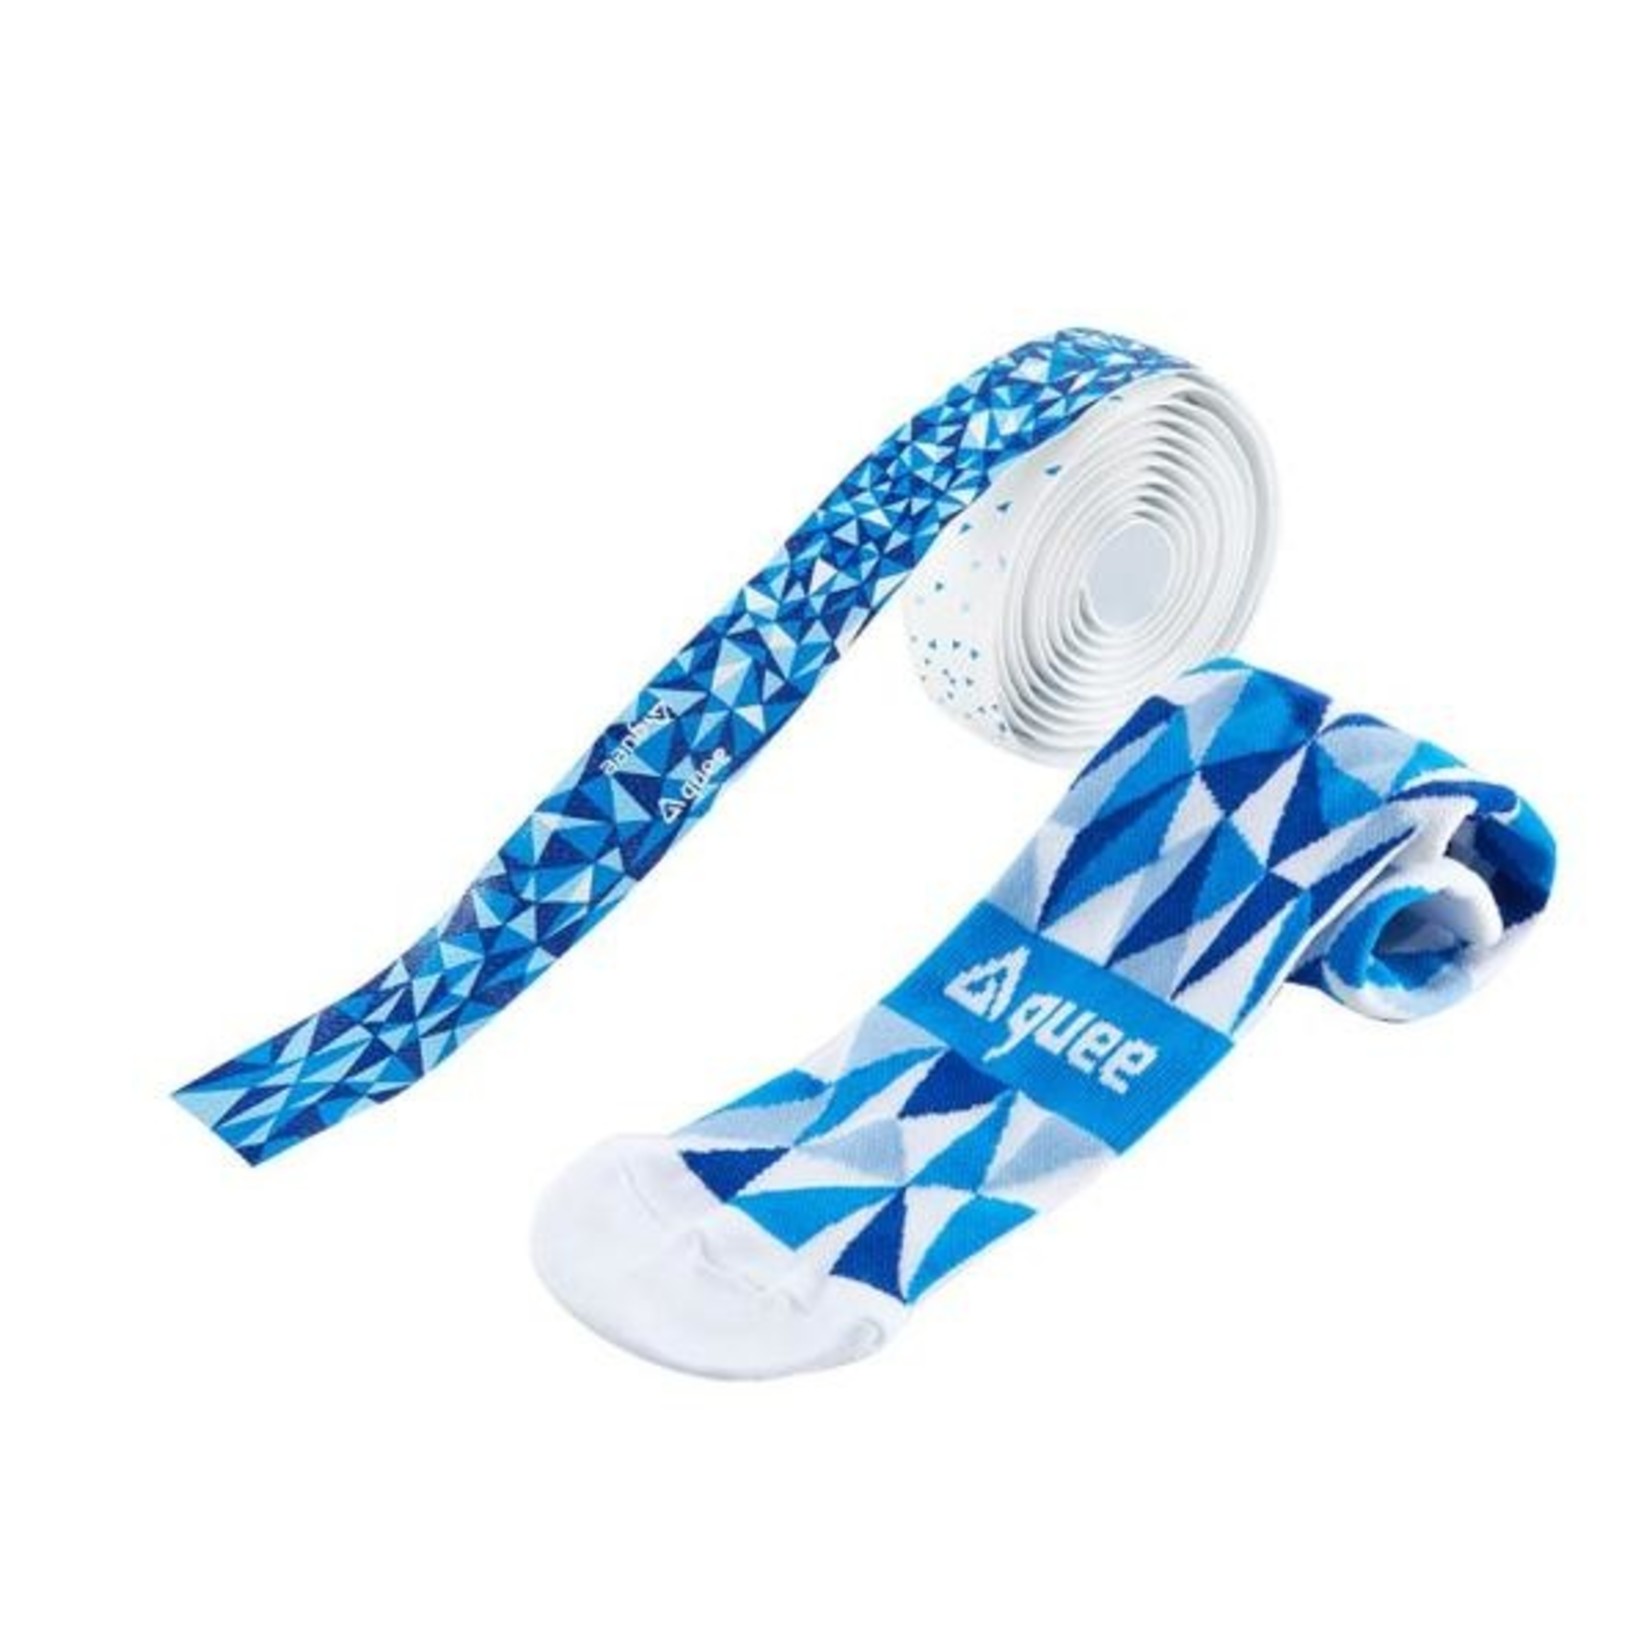 Guee Guee Socks - Geo Racefit - White & Blue - Size Small